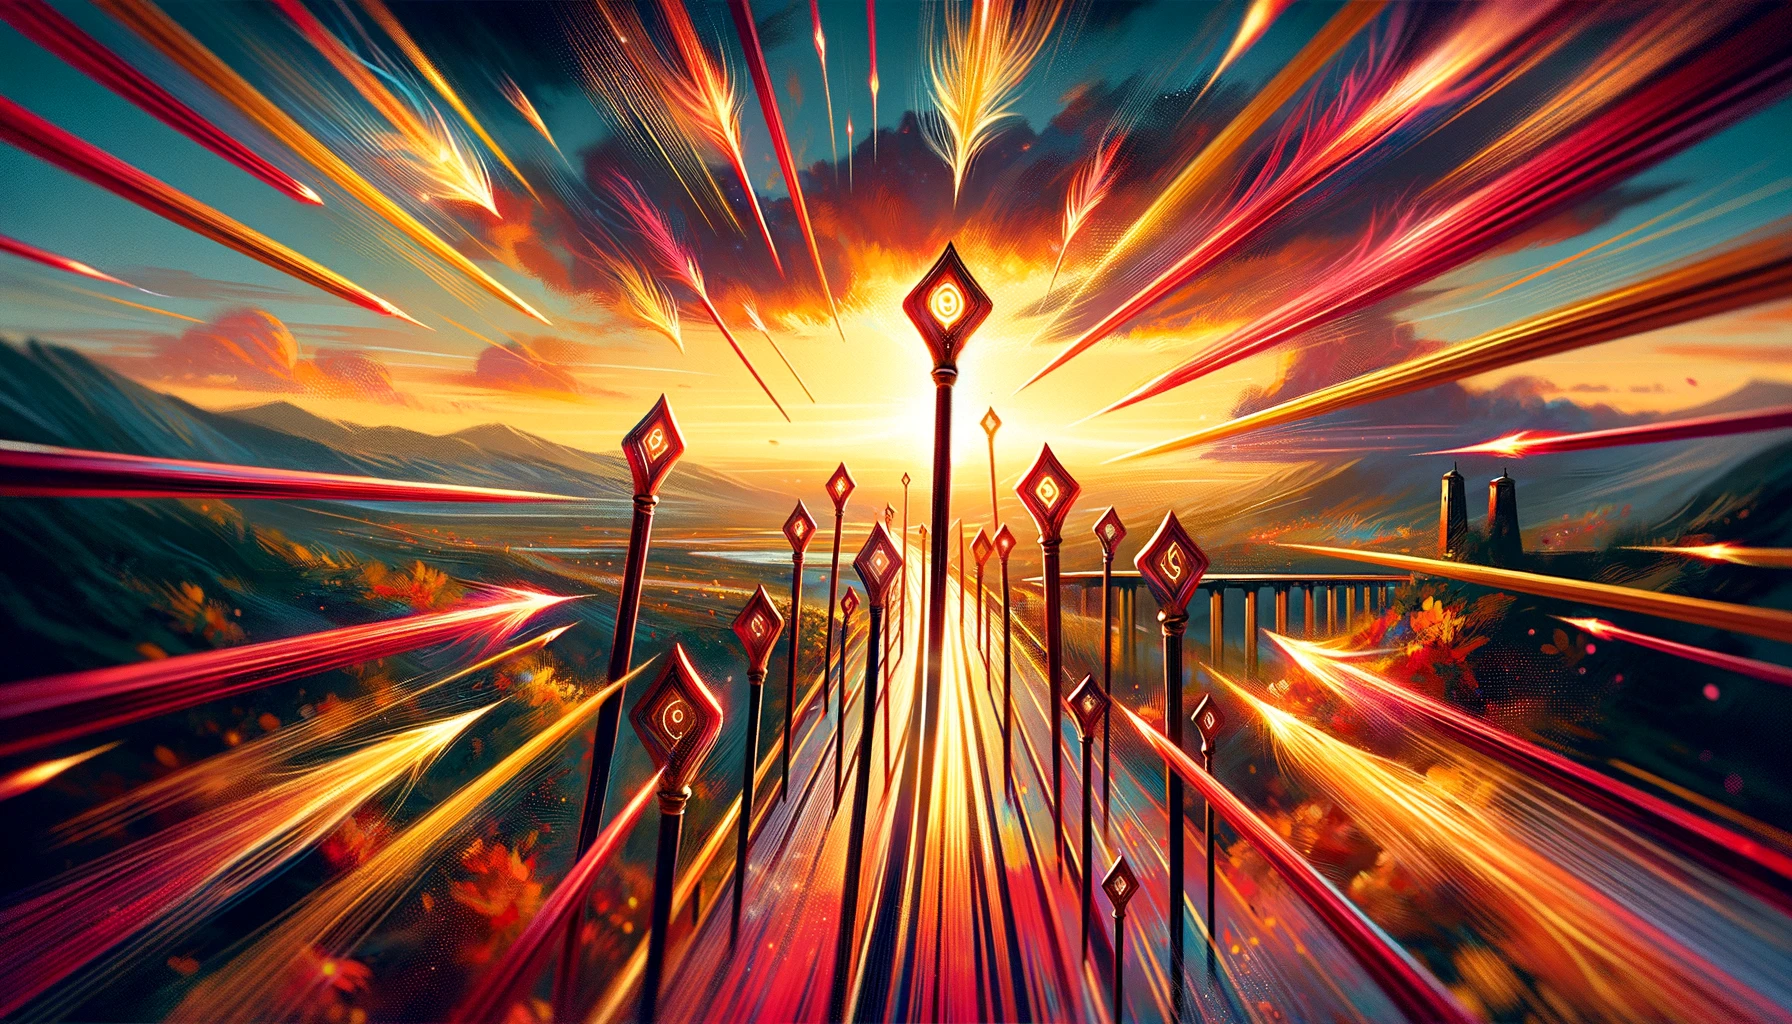 The image illustrates the desire for swift progress, clear communication, and immediate action towards achieving goals. Against a vibrant and dynamic background filled with motion, the scene captures focused energy and momentum towards a specific aim. The visual representation enriches the article by embodying the energetic and forward-moving spirit of the card, emphasizing the speed and direction of movement towards success.